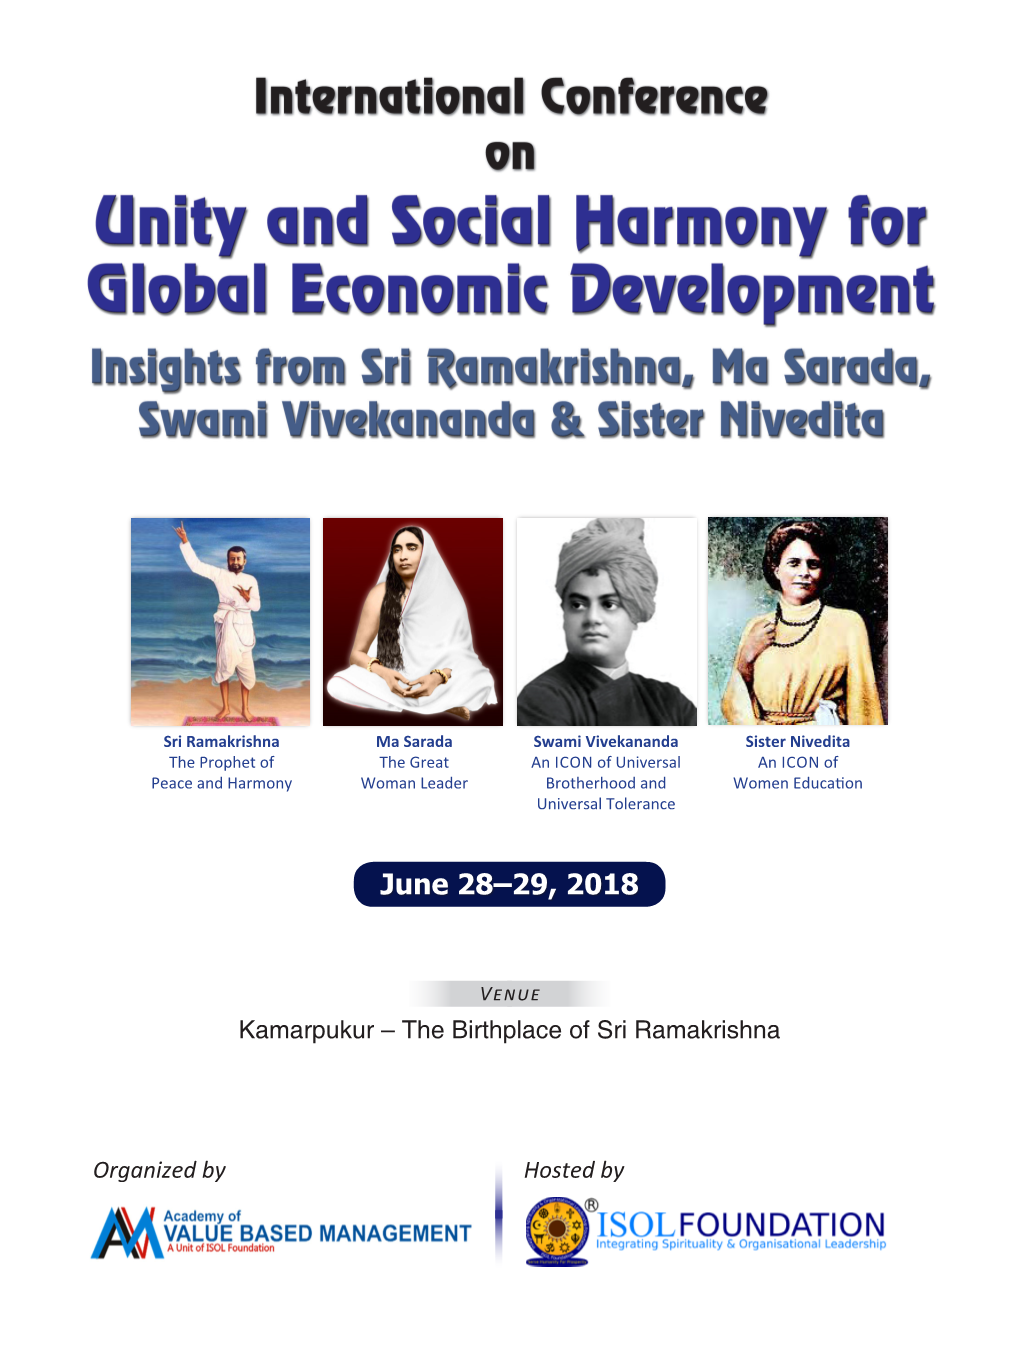 International Conference on Unity and Social Harmony for Global